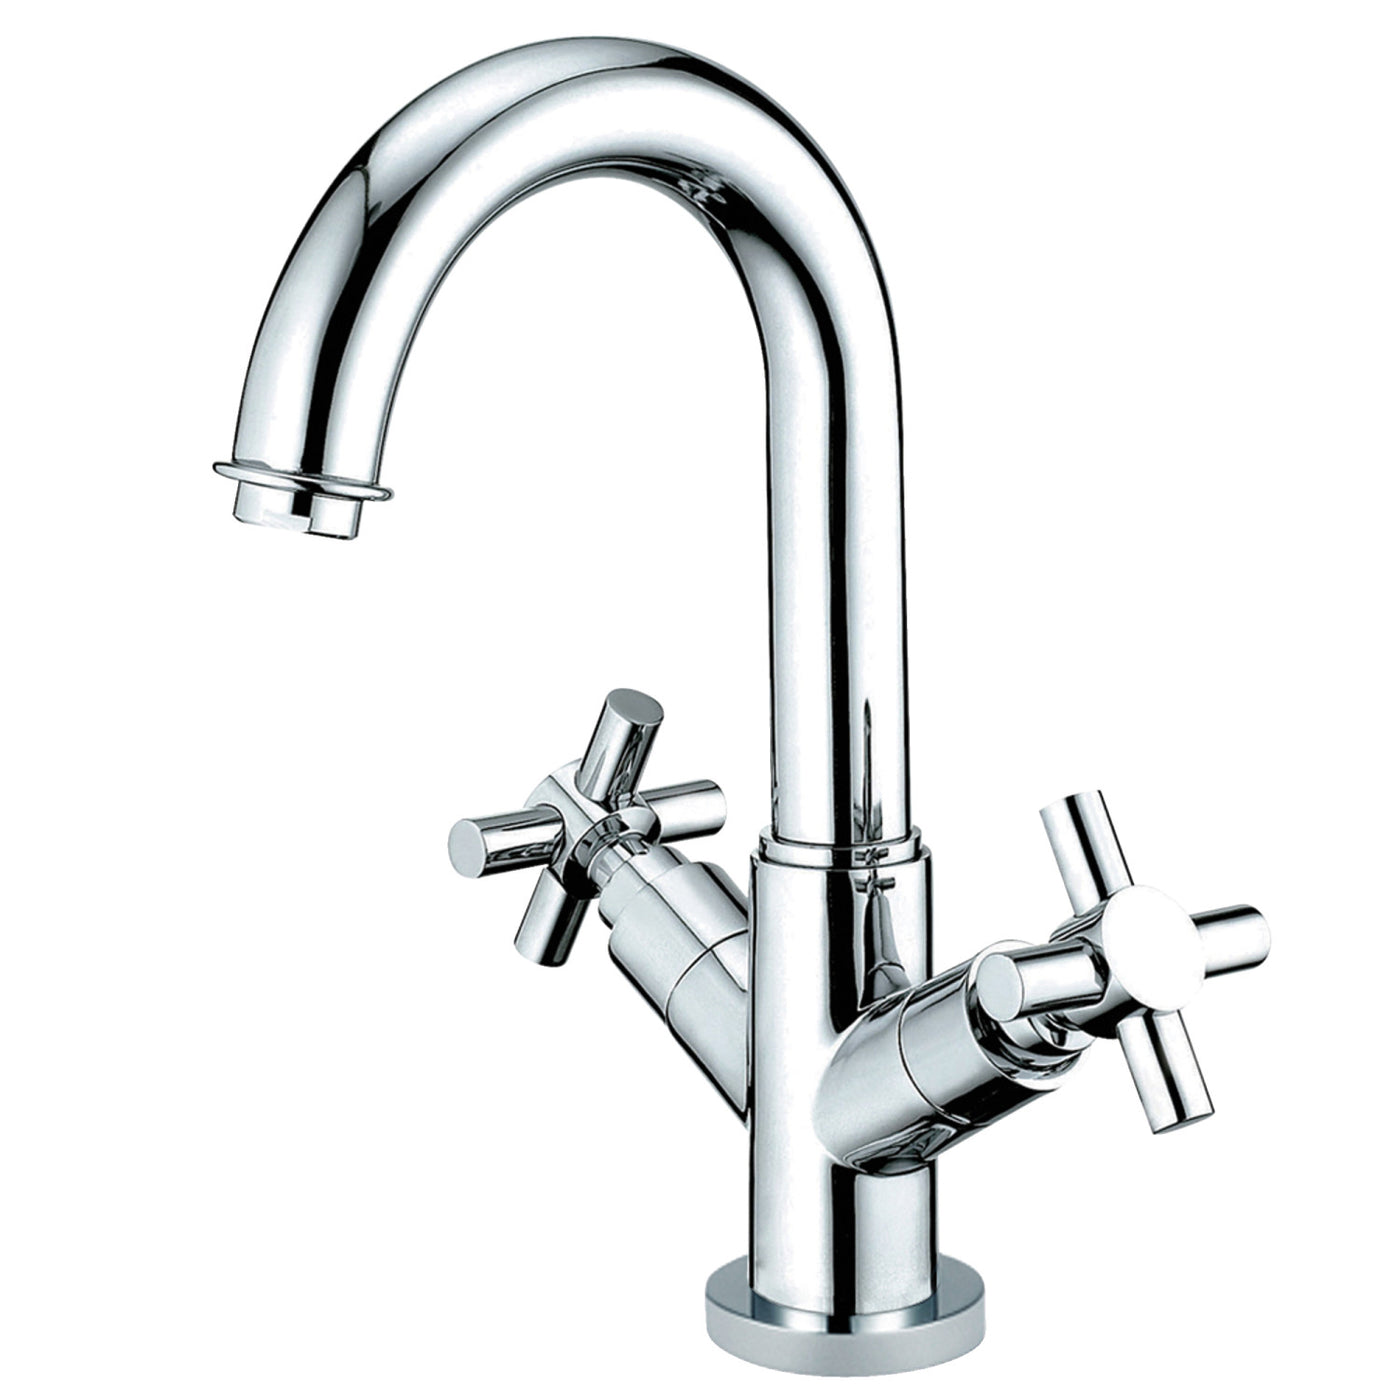 Elements of Design ES8451JX Two-Handle Bathroom Faucet with Push Pop-Up, Polished Chrome